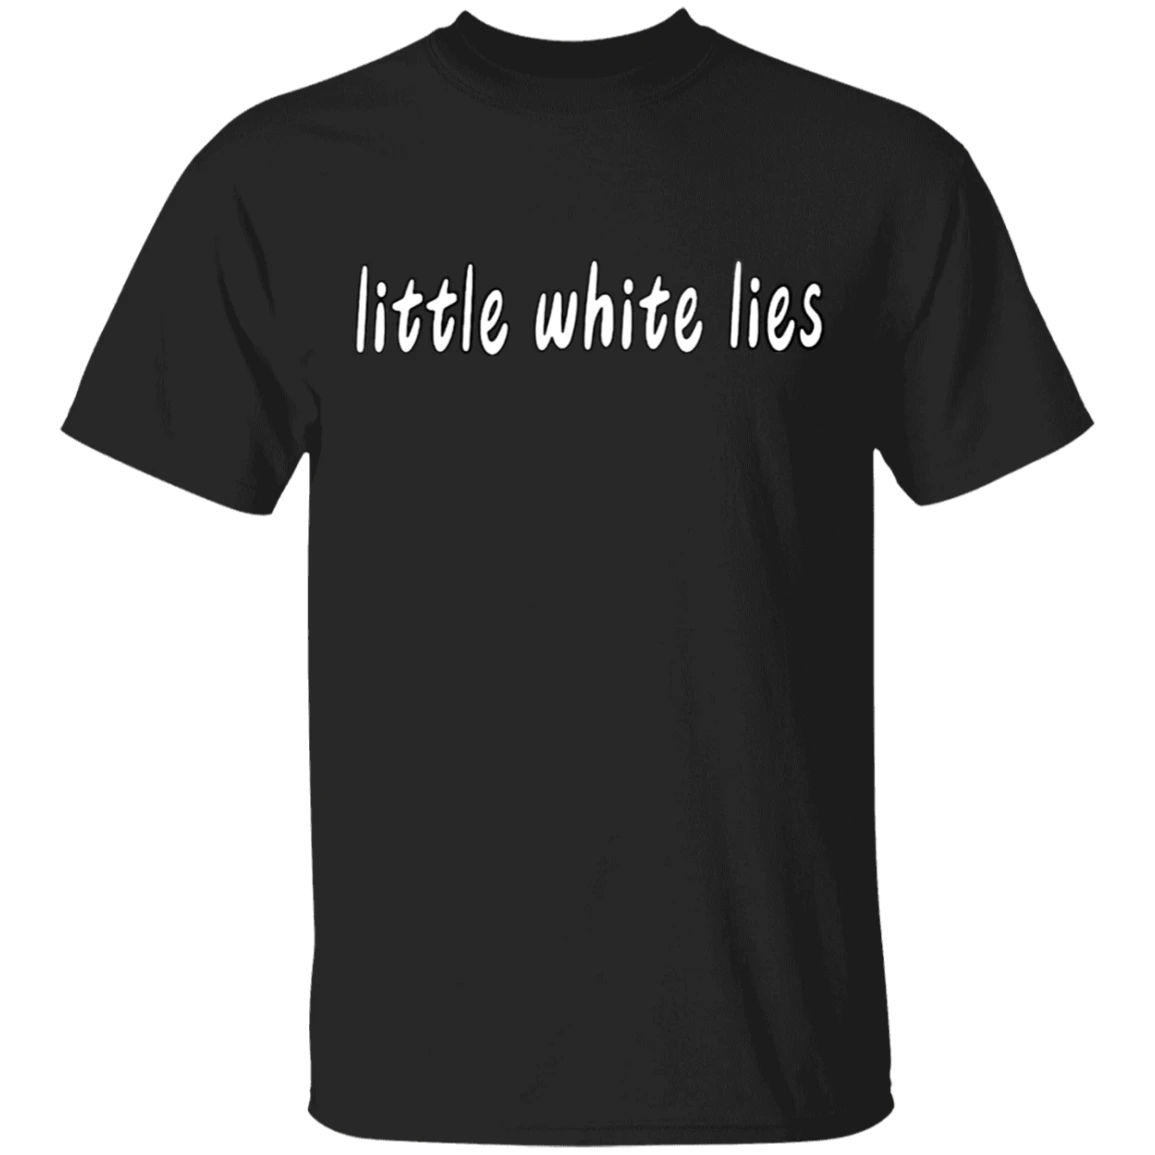 White Lie T-Shirt Party Ideas Shirt Funny Best Gift For Friends ...